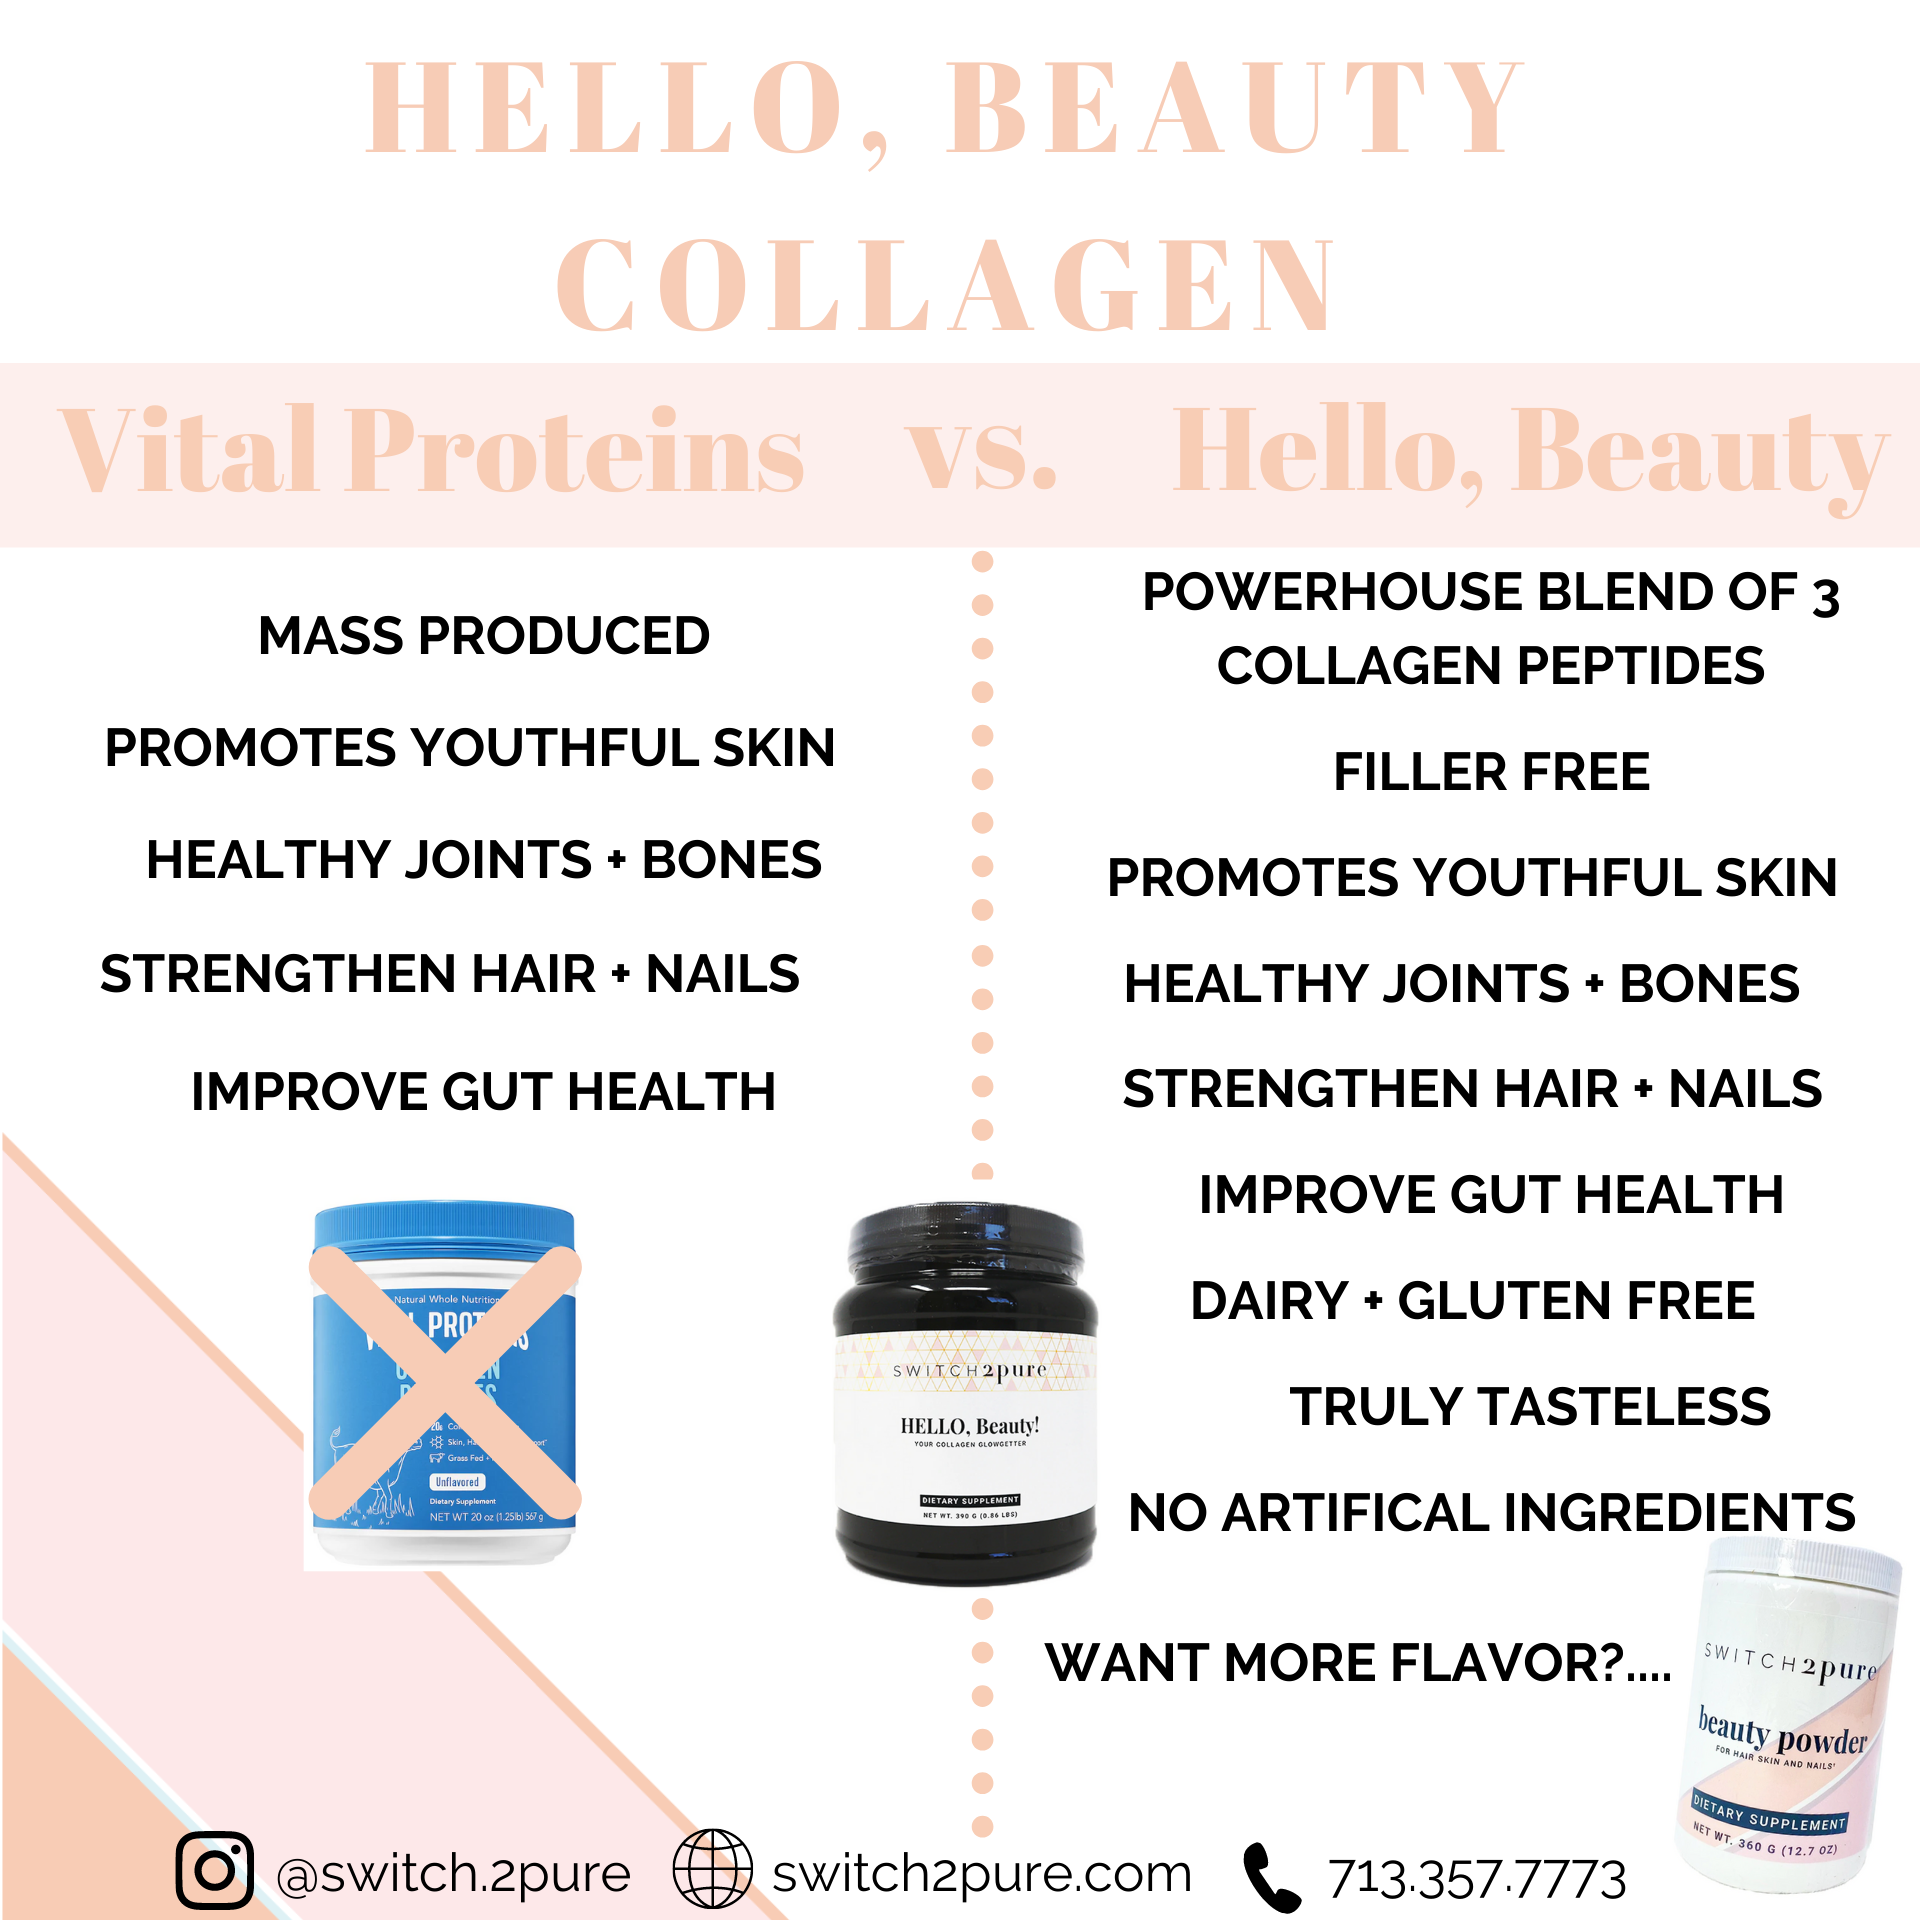 Switch2pure Hello, Beauty Collagen